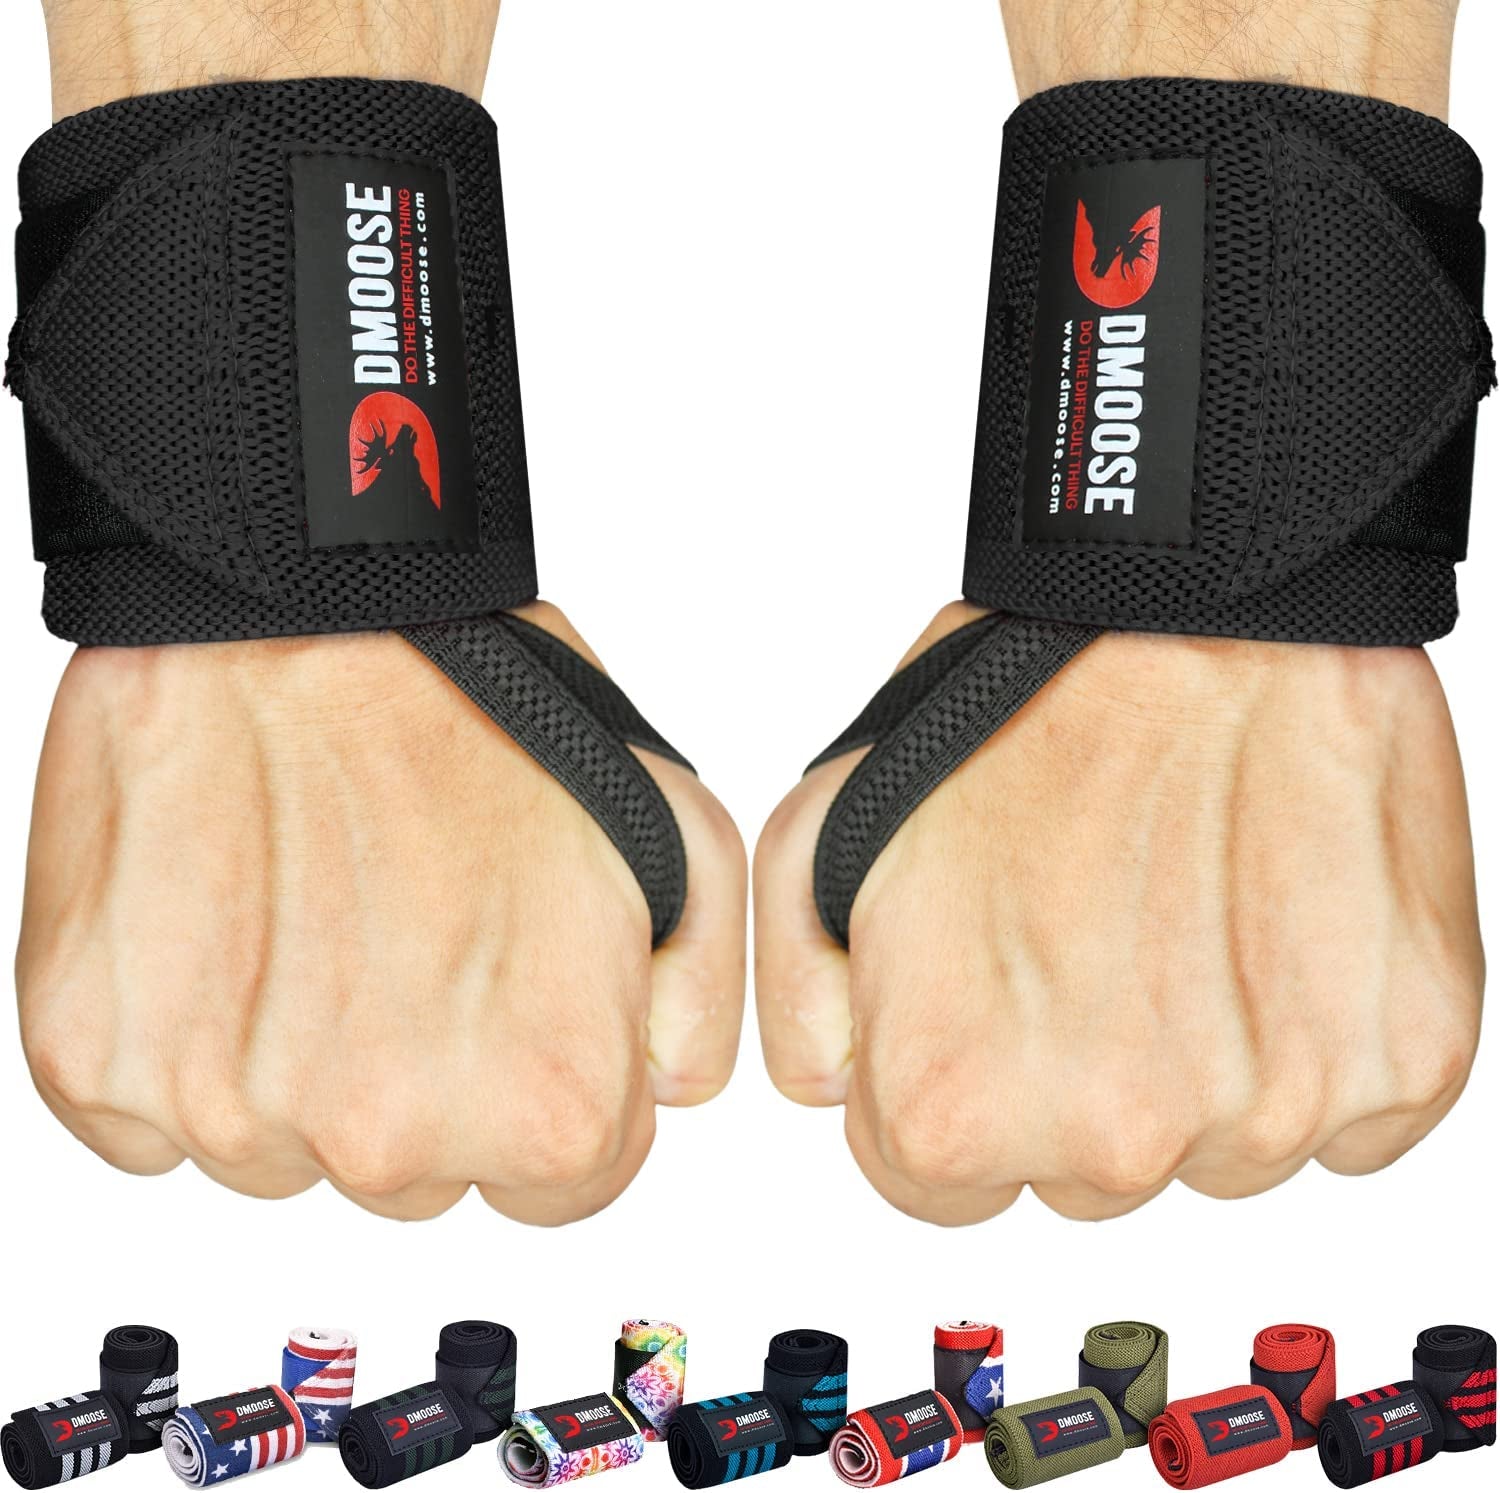 Wrist Wraps, Avoid Injury and Maximize Grip with Thumb Loop, 18" or 12" Gym Straps Pair, Wrist Straps for Weightlifting, Powerlifting, Bench Press, Bodybuilding, Deadlift Straps for Men & Women